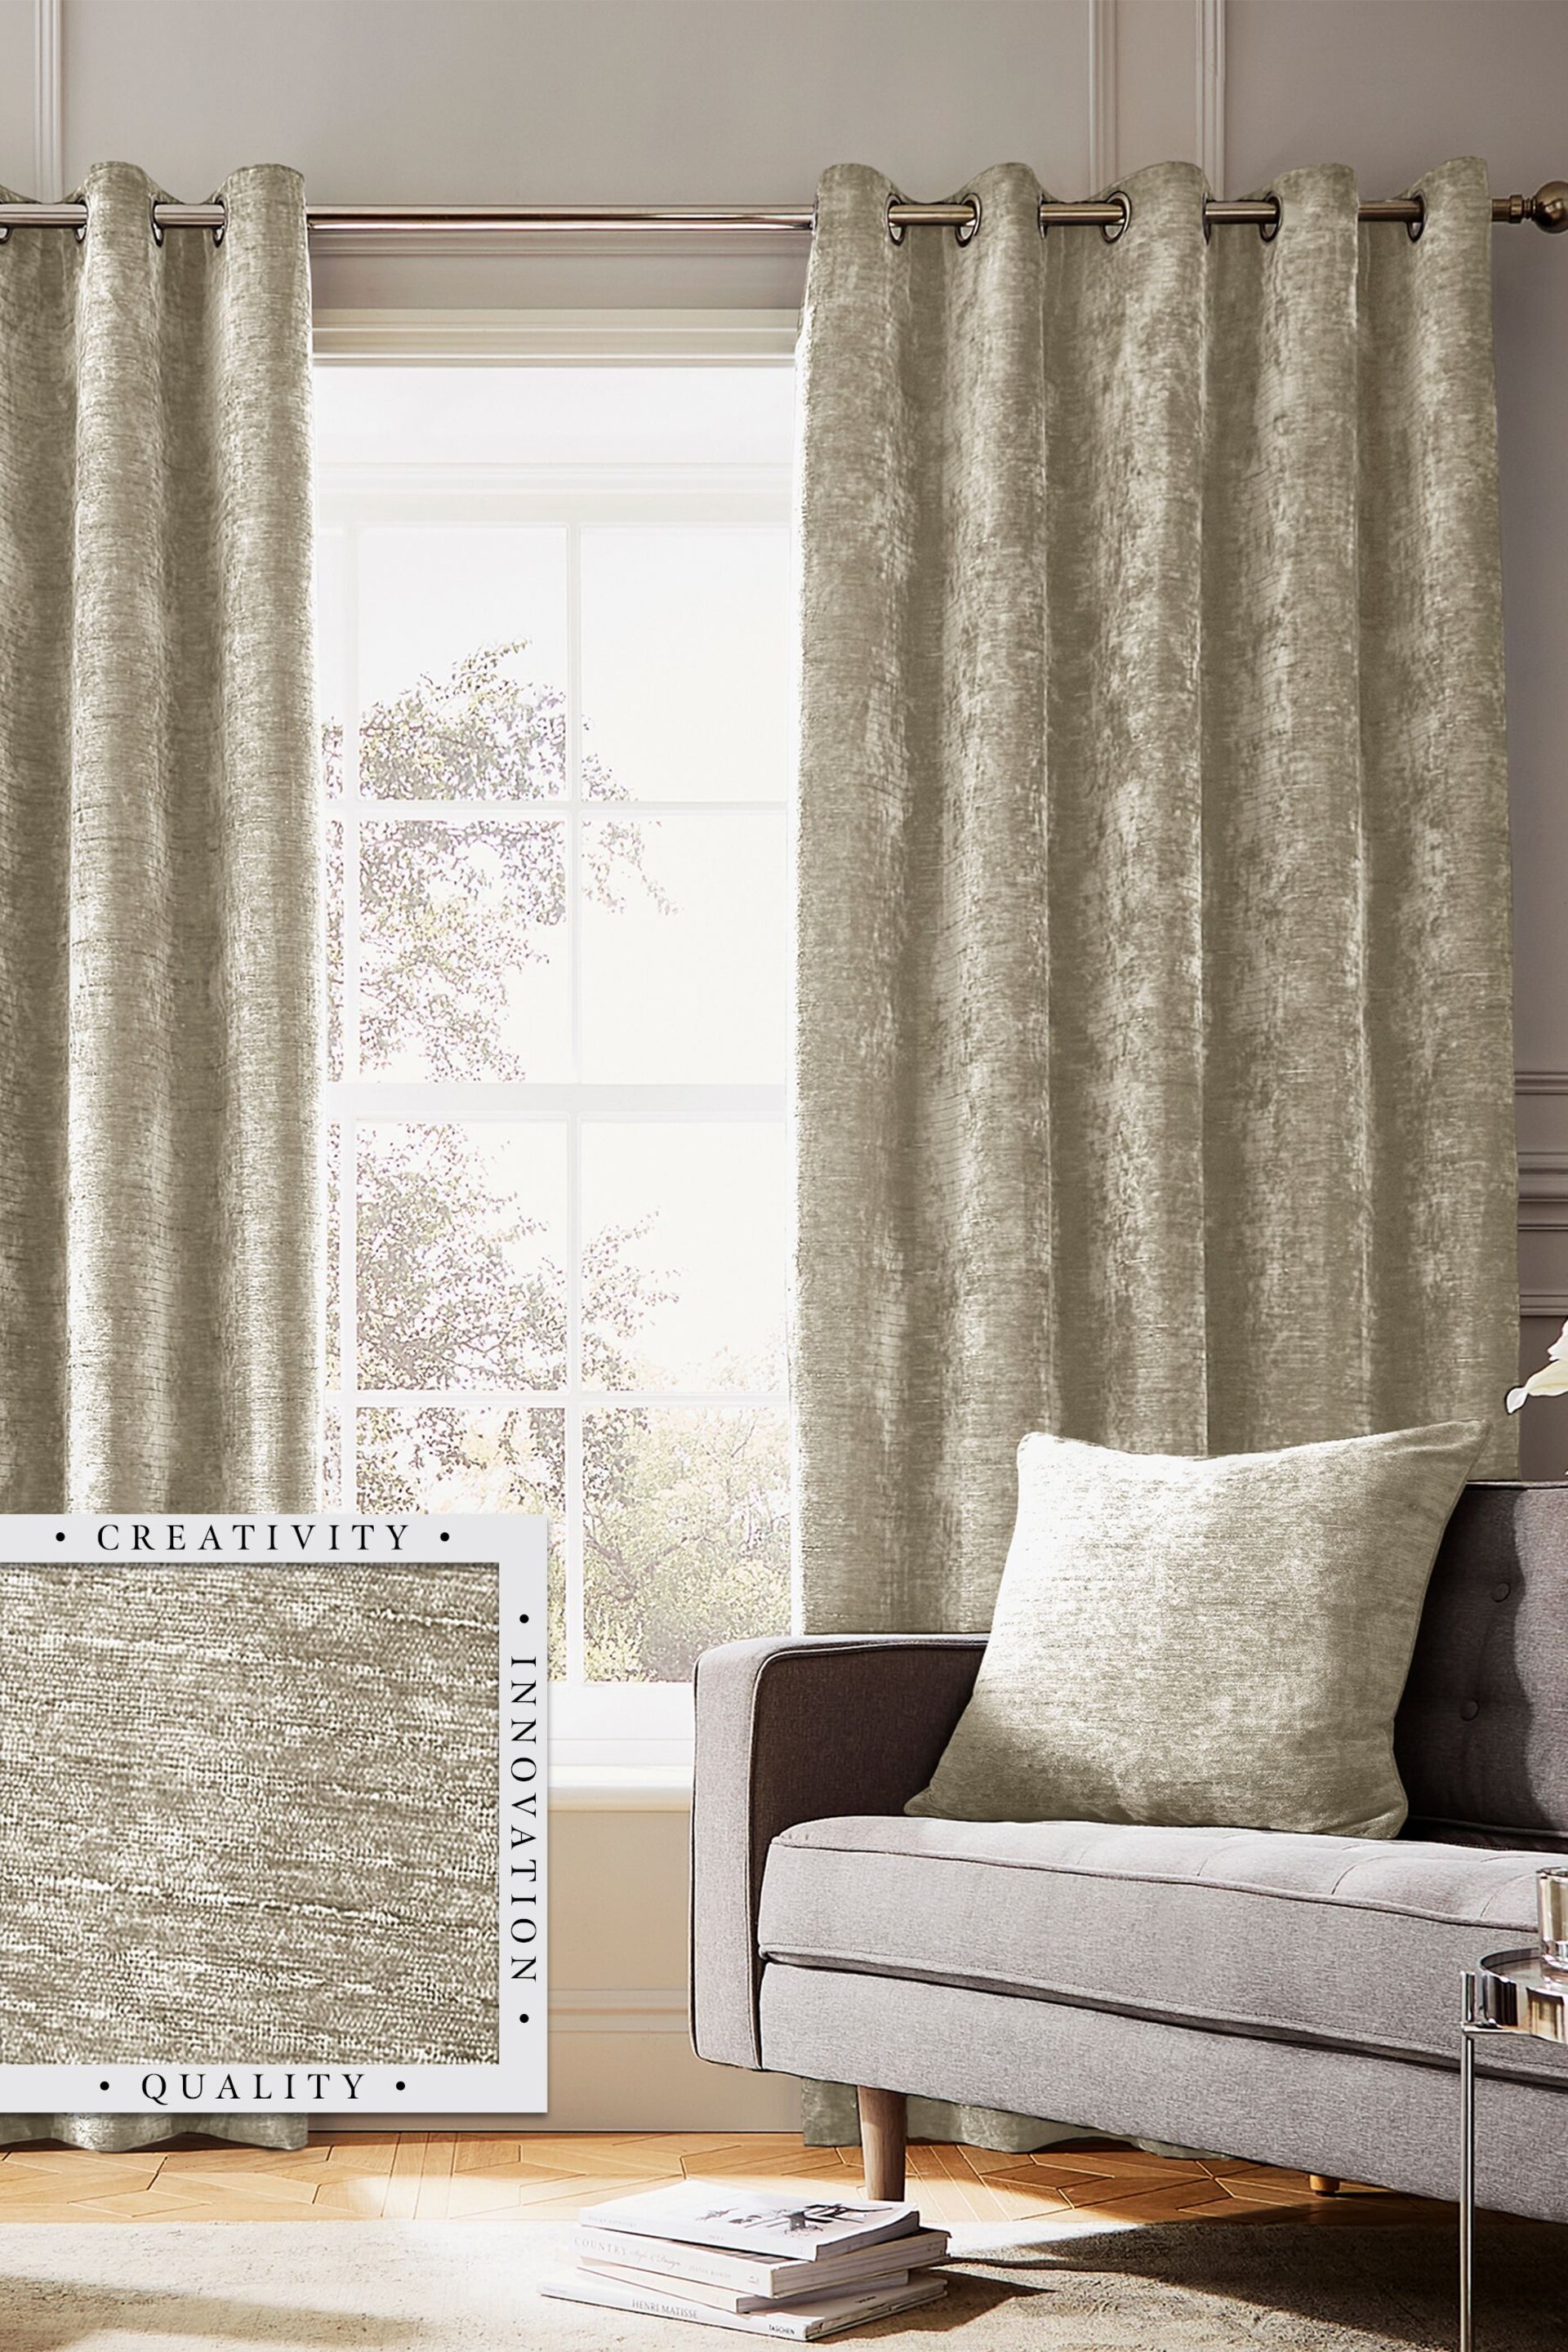 Hyperion Cream Selene Luxury Chenille Weighted Thermal Lined Eyelet Curtains - Image 1 of 4